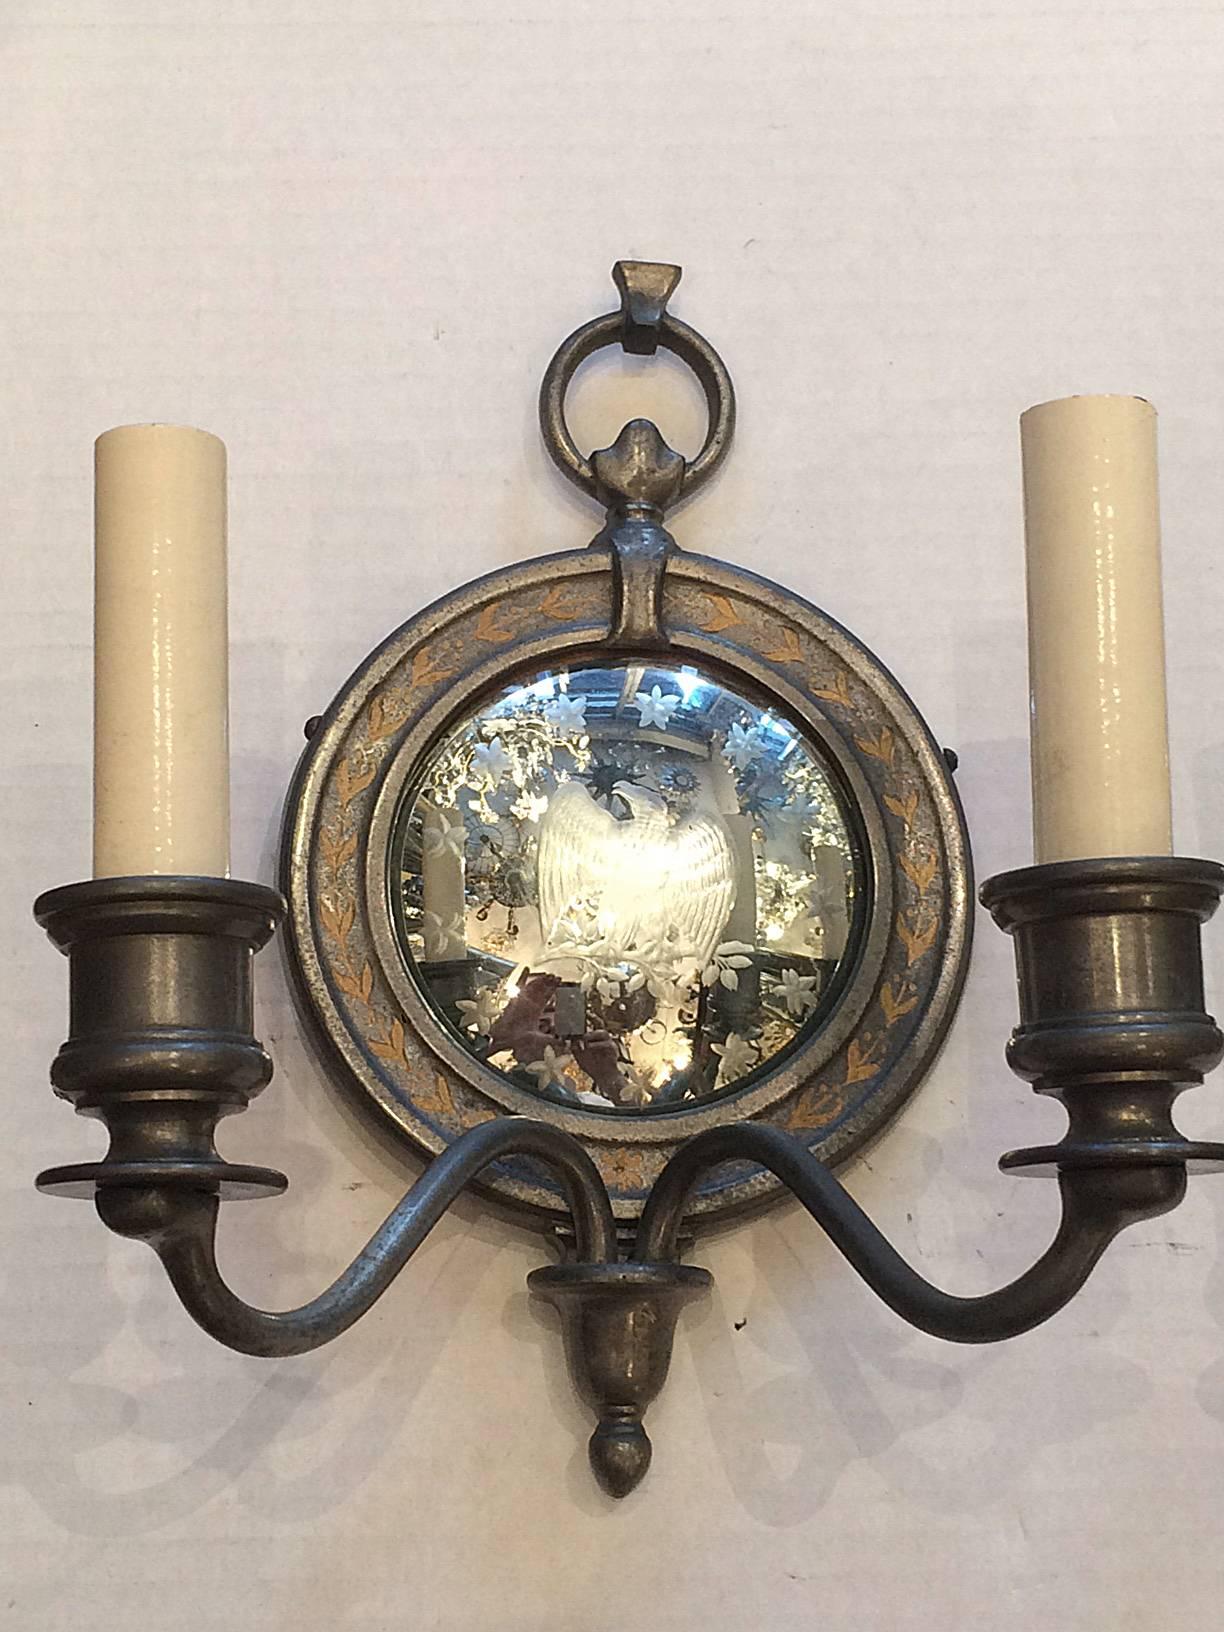 Pair of circa 1920’s American Empire-style sconces with eagles etched on mirror backplates.

Measurements:
Height: 10?
Depth: 6.5?
Width: 8?.